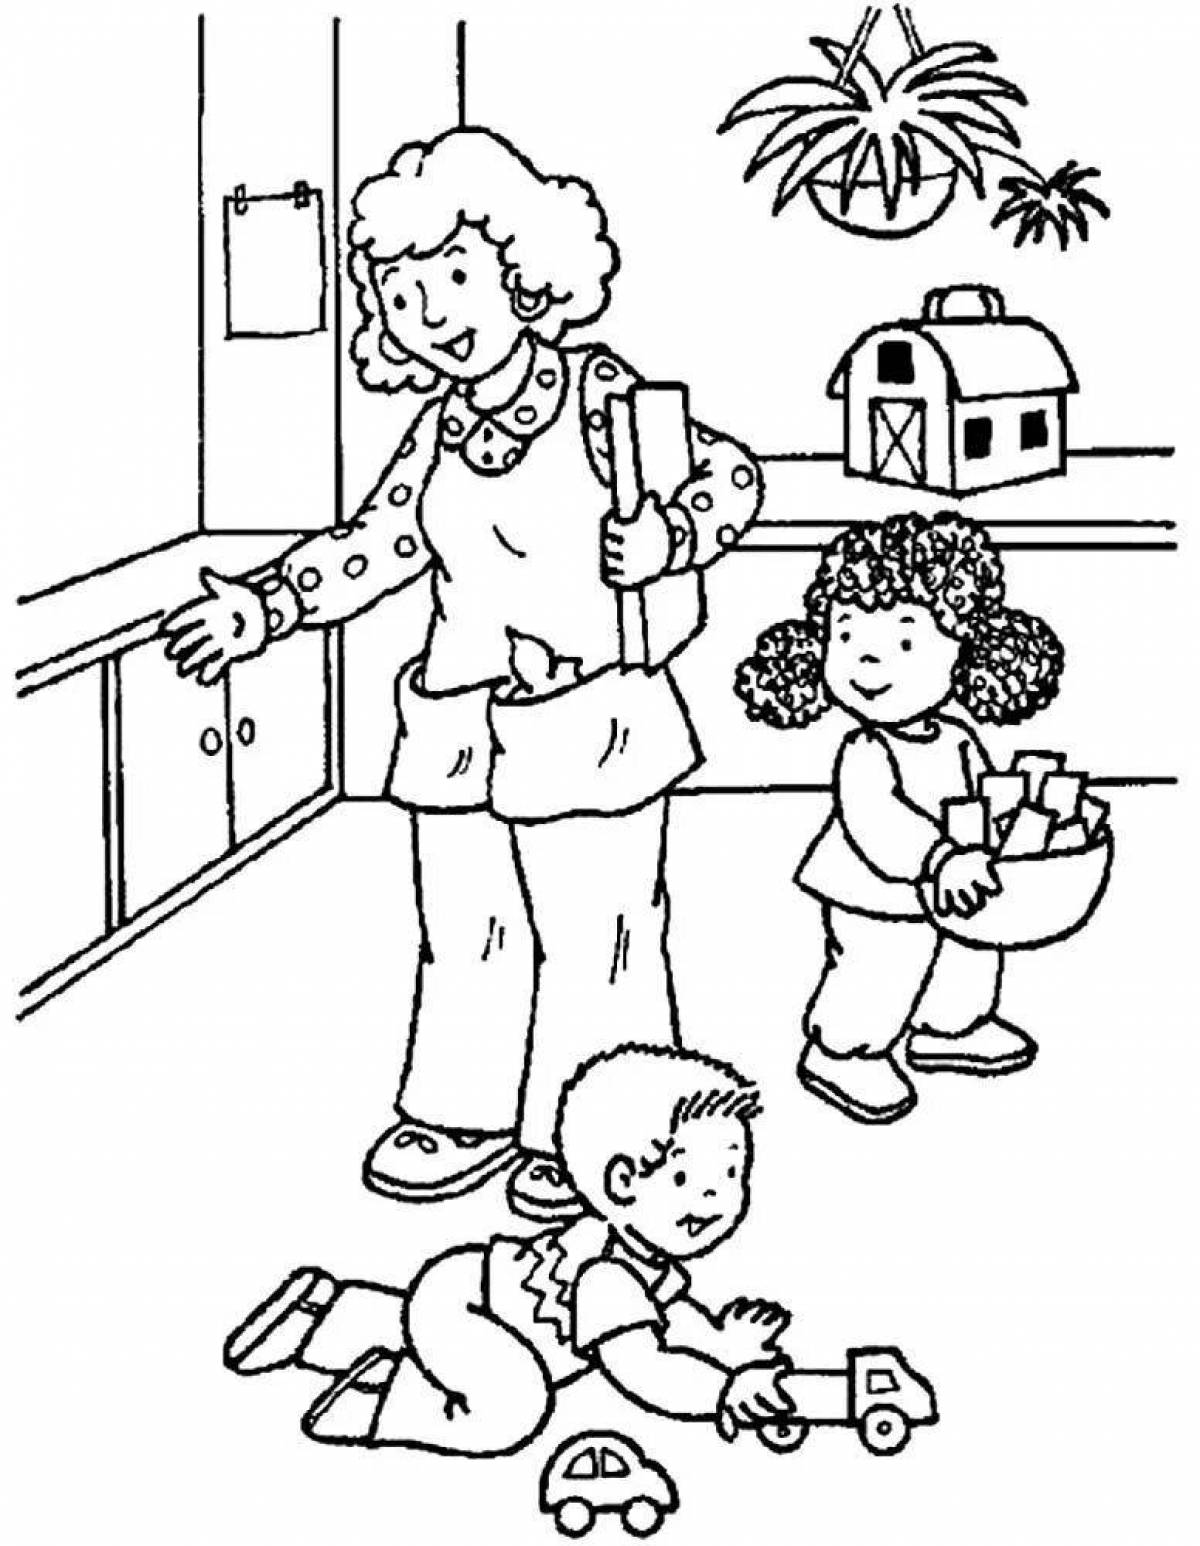 Color-frenzy coloring page kindergarten